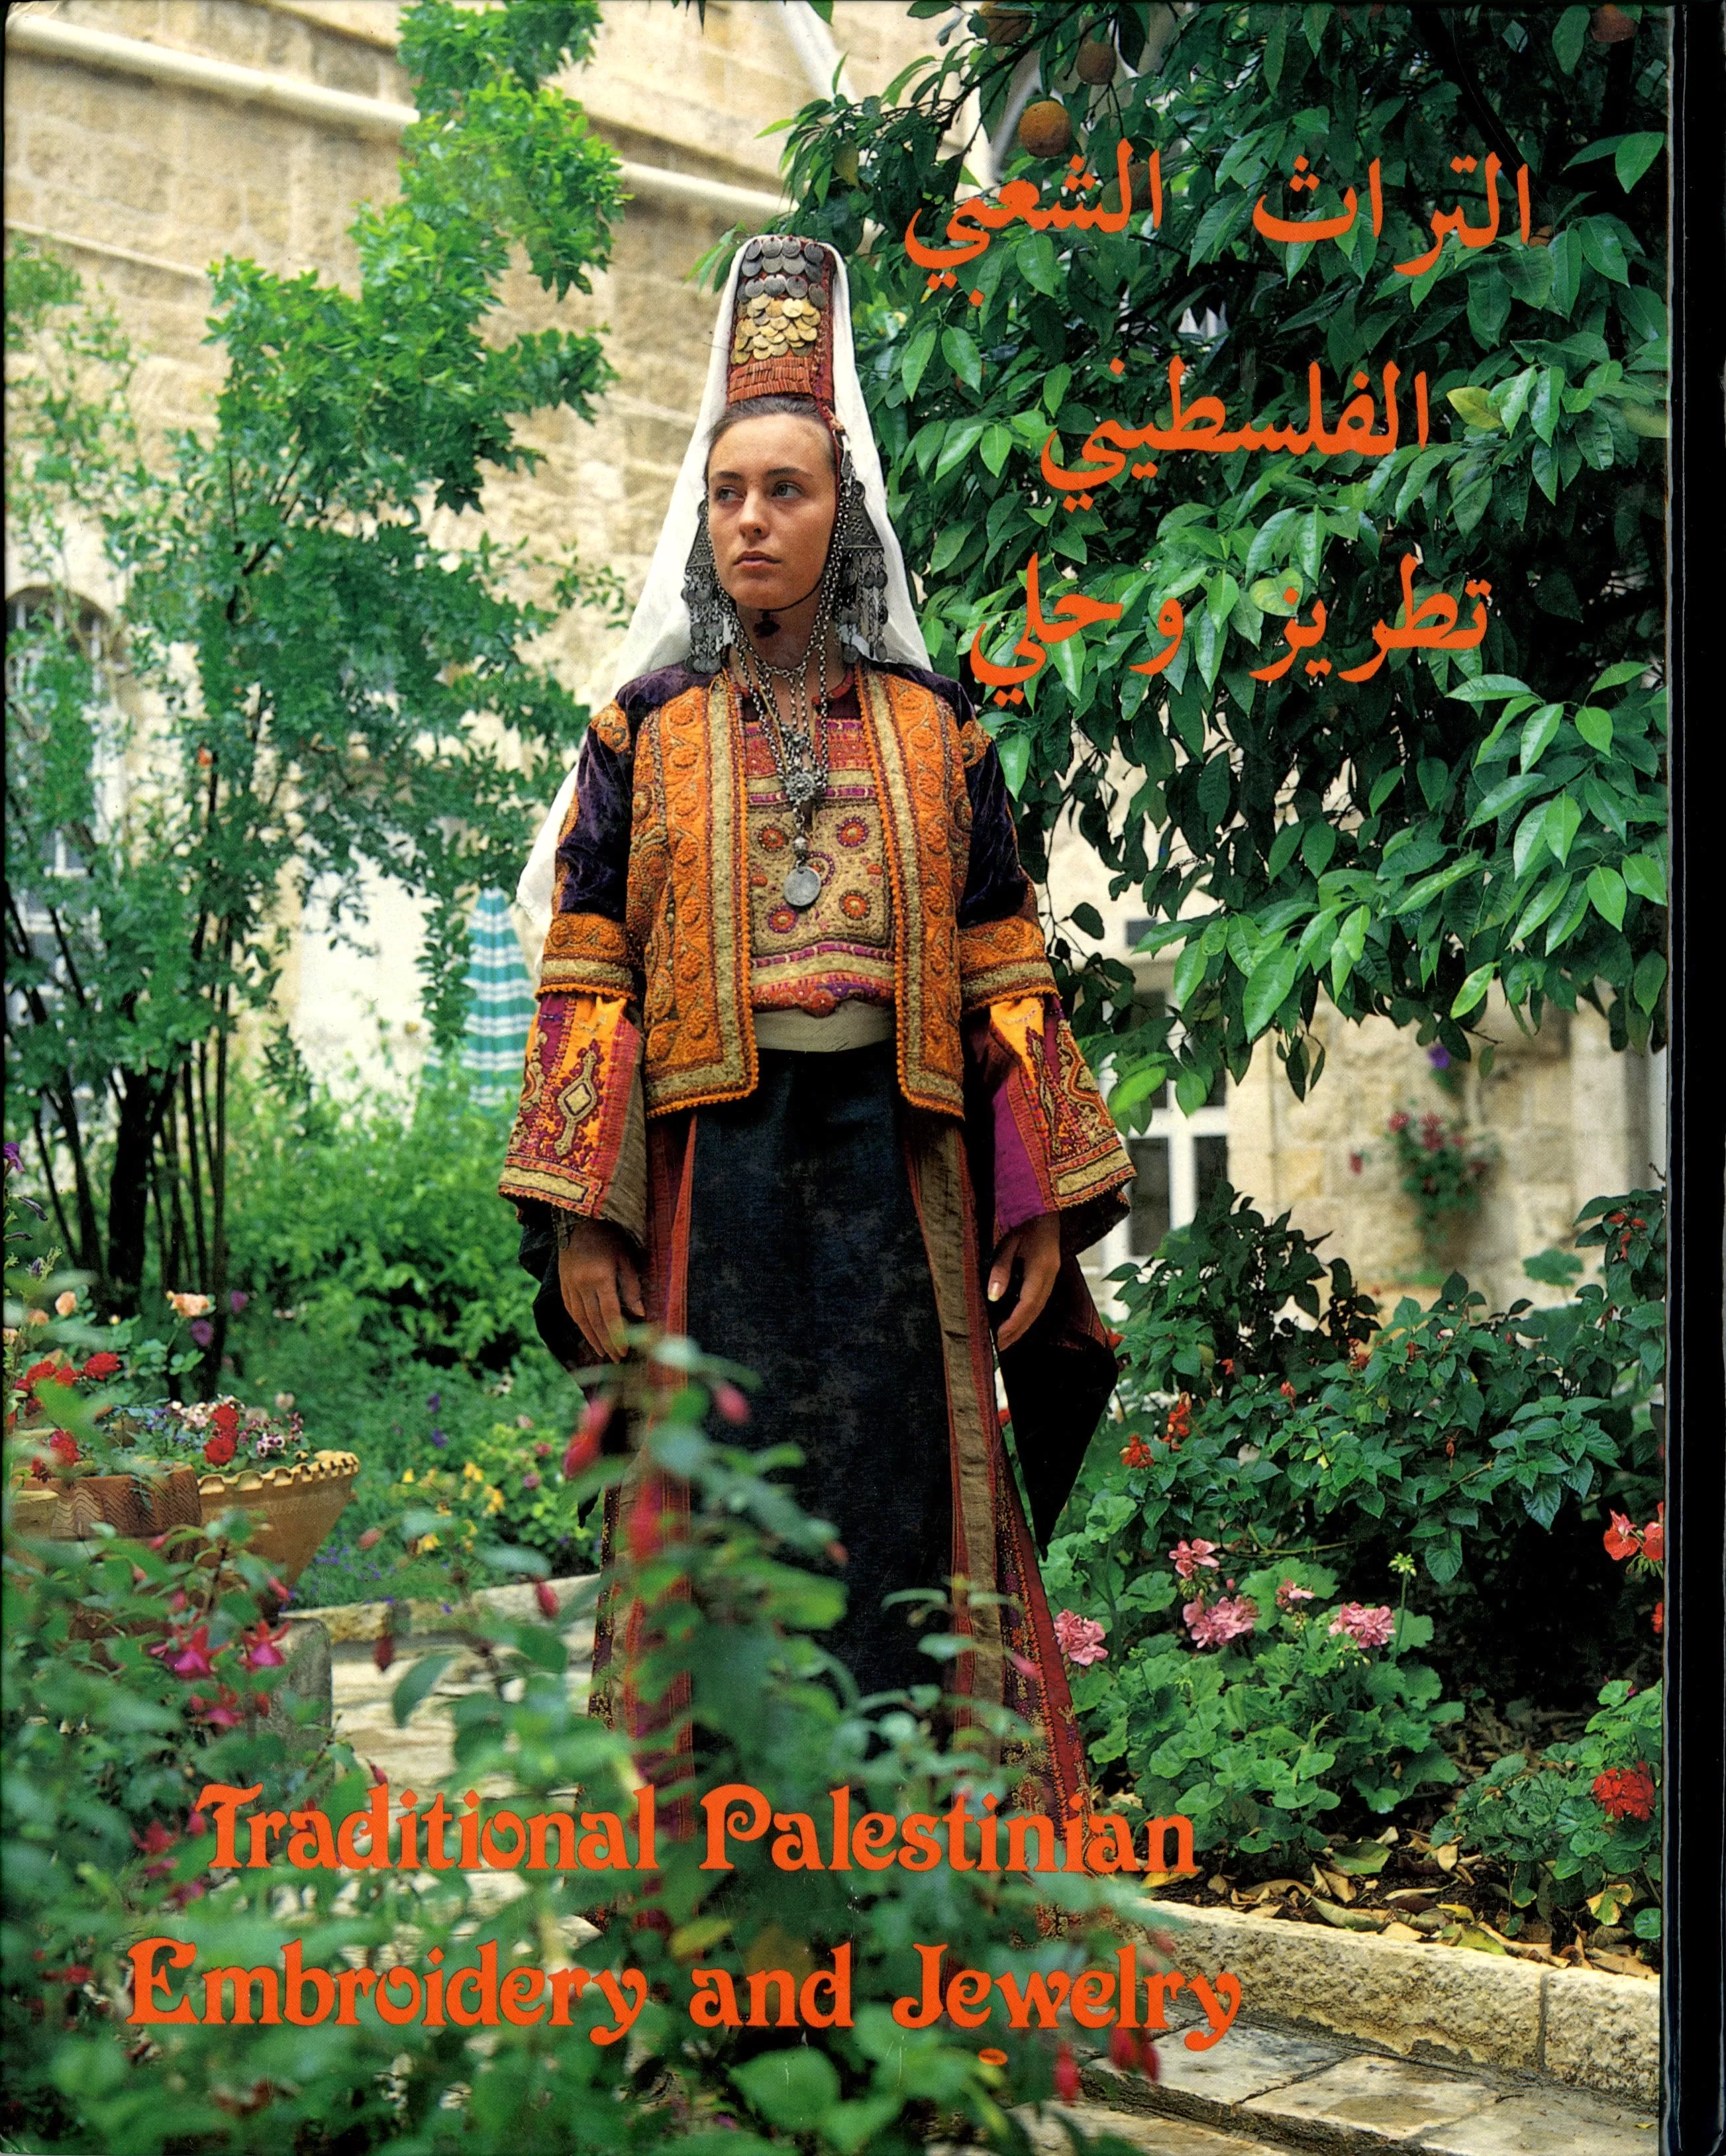 Book cover "Traditional Palestinian embroidery and jewelry"